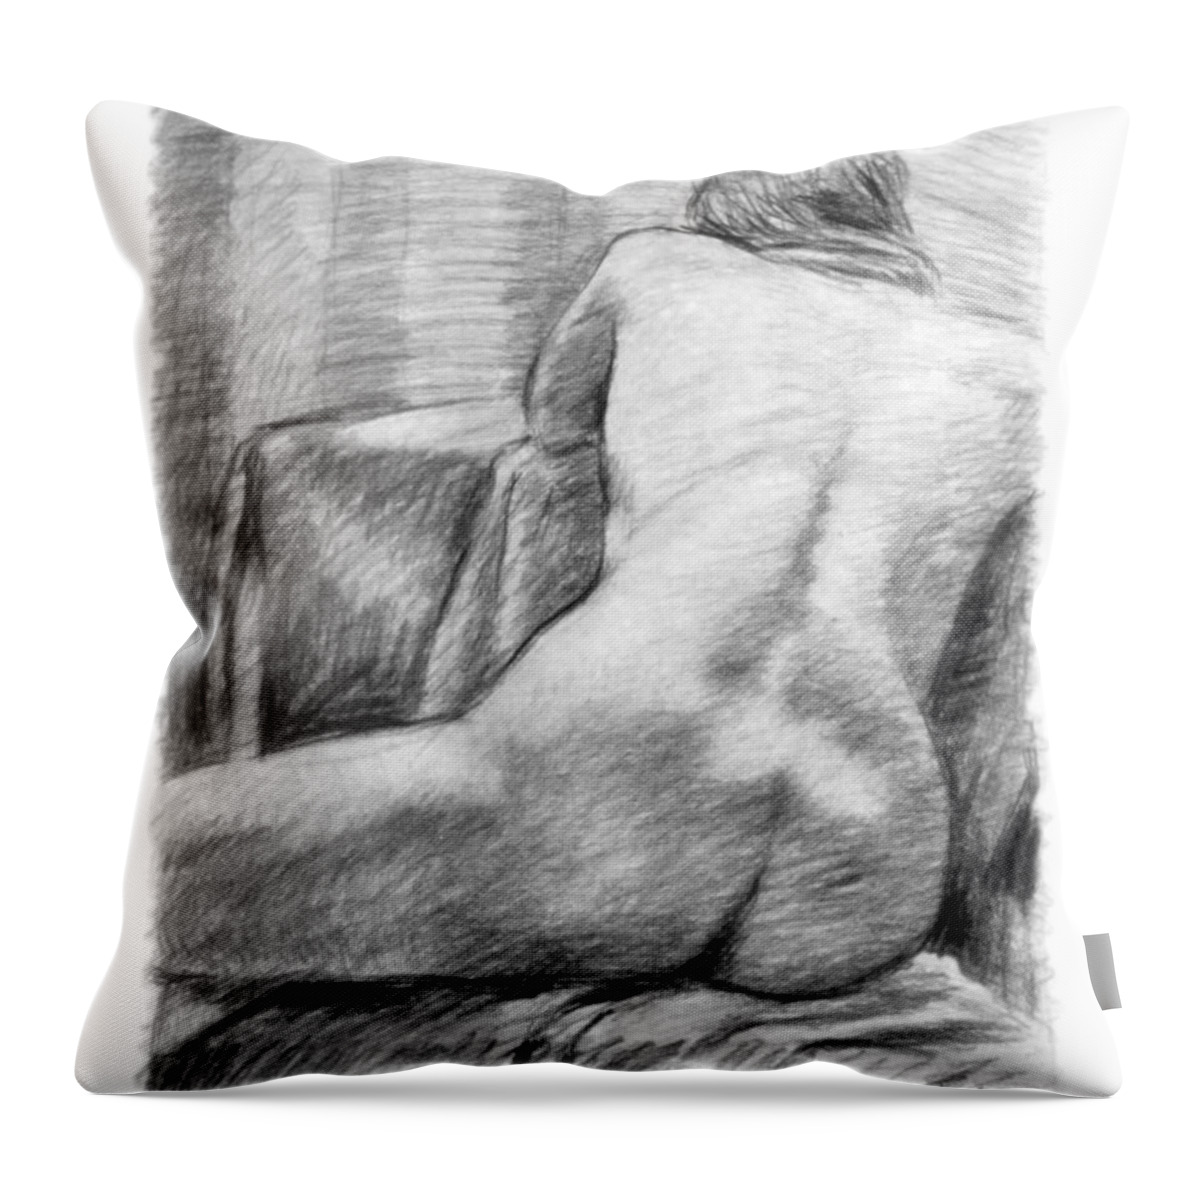 Adam Long Throw Pillow featuring the drawing Incongruous by Adam Long